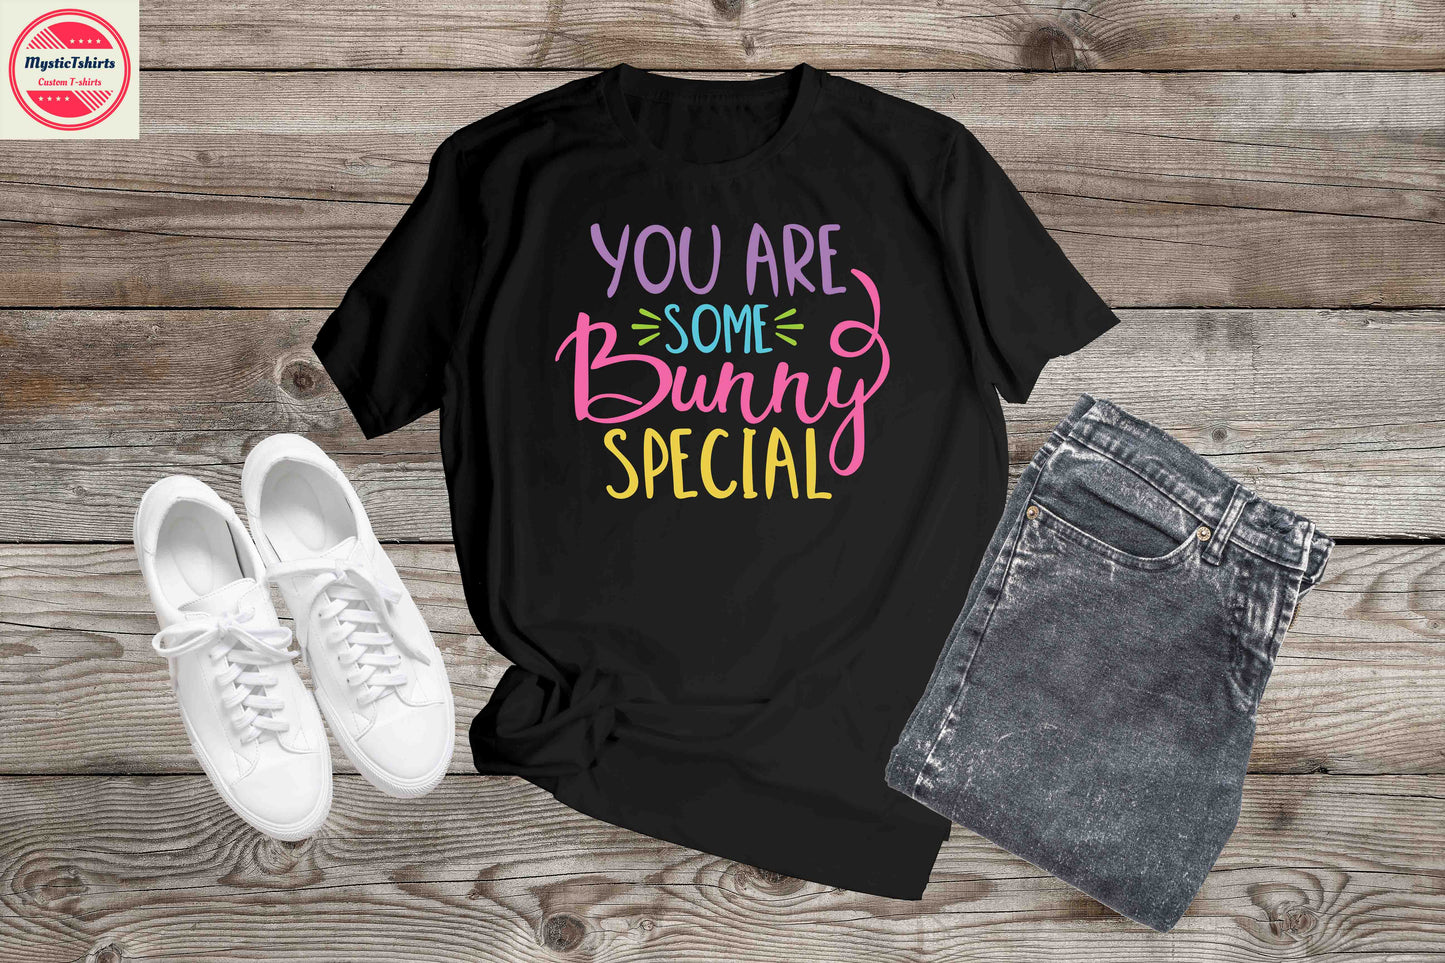 483. YOU ARE SOME BUNNY SPECIAL, Custom Made Shirt, Personalized T-Shirt, Custom Text, Make Your Own Shirt, Custom Tee